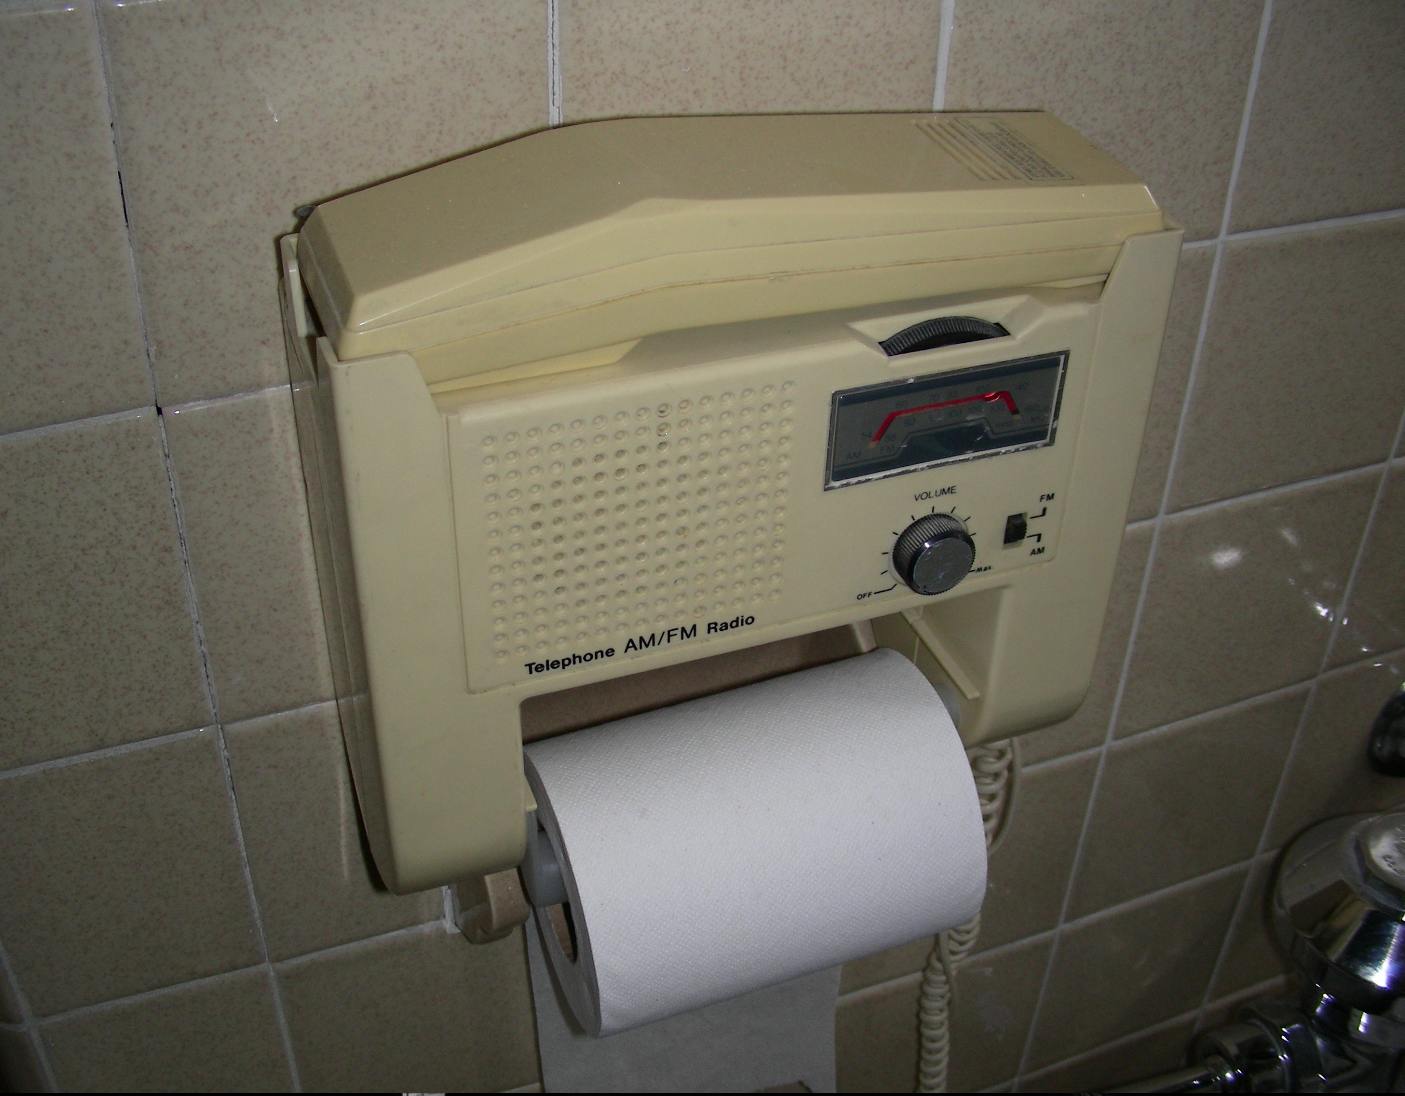 This old toilet paper holder has a built-in AM radio : r/mildlyinteresting